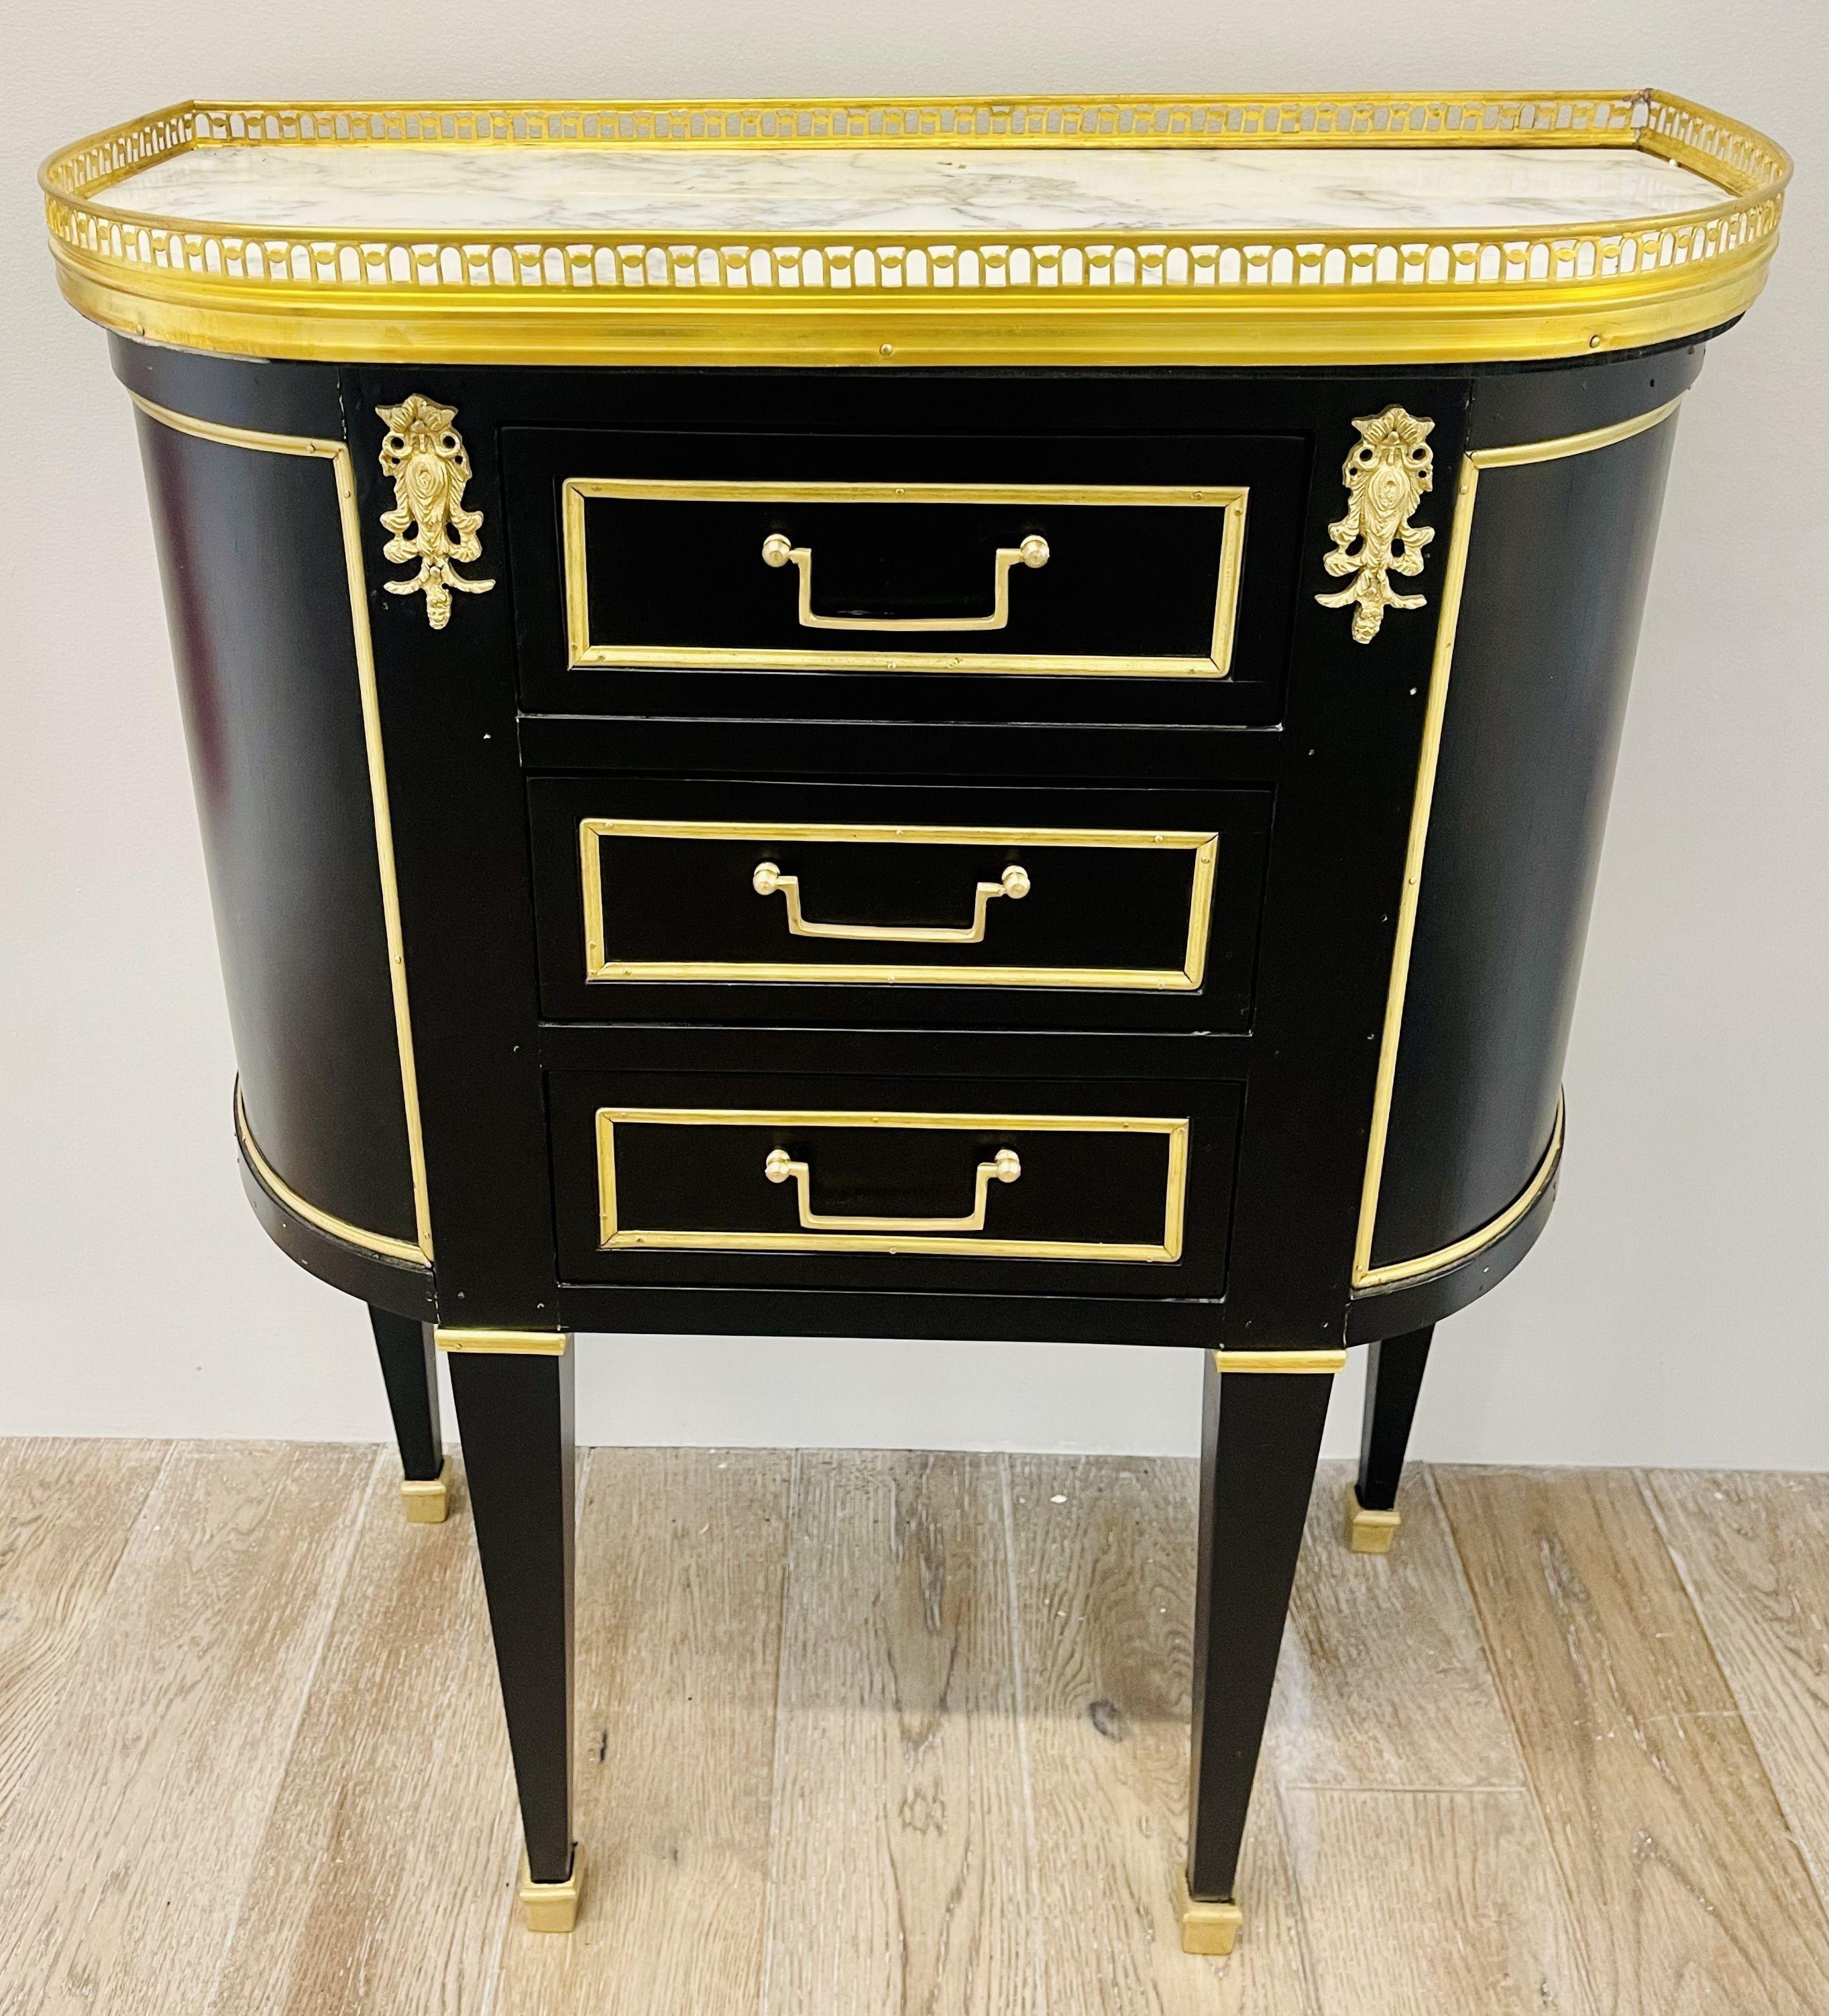 Pair of Jansen Inspired Marble-Top Galleried Ebonized End Tables / Nightstands For Sale 2